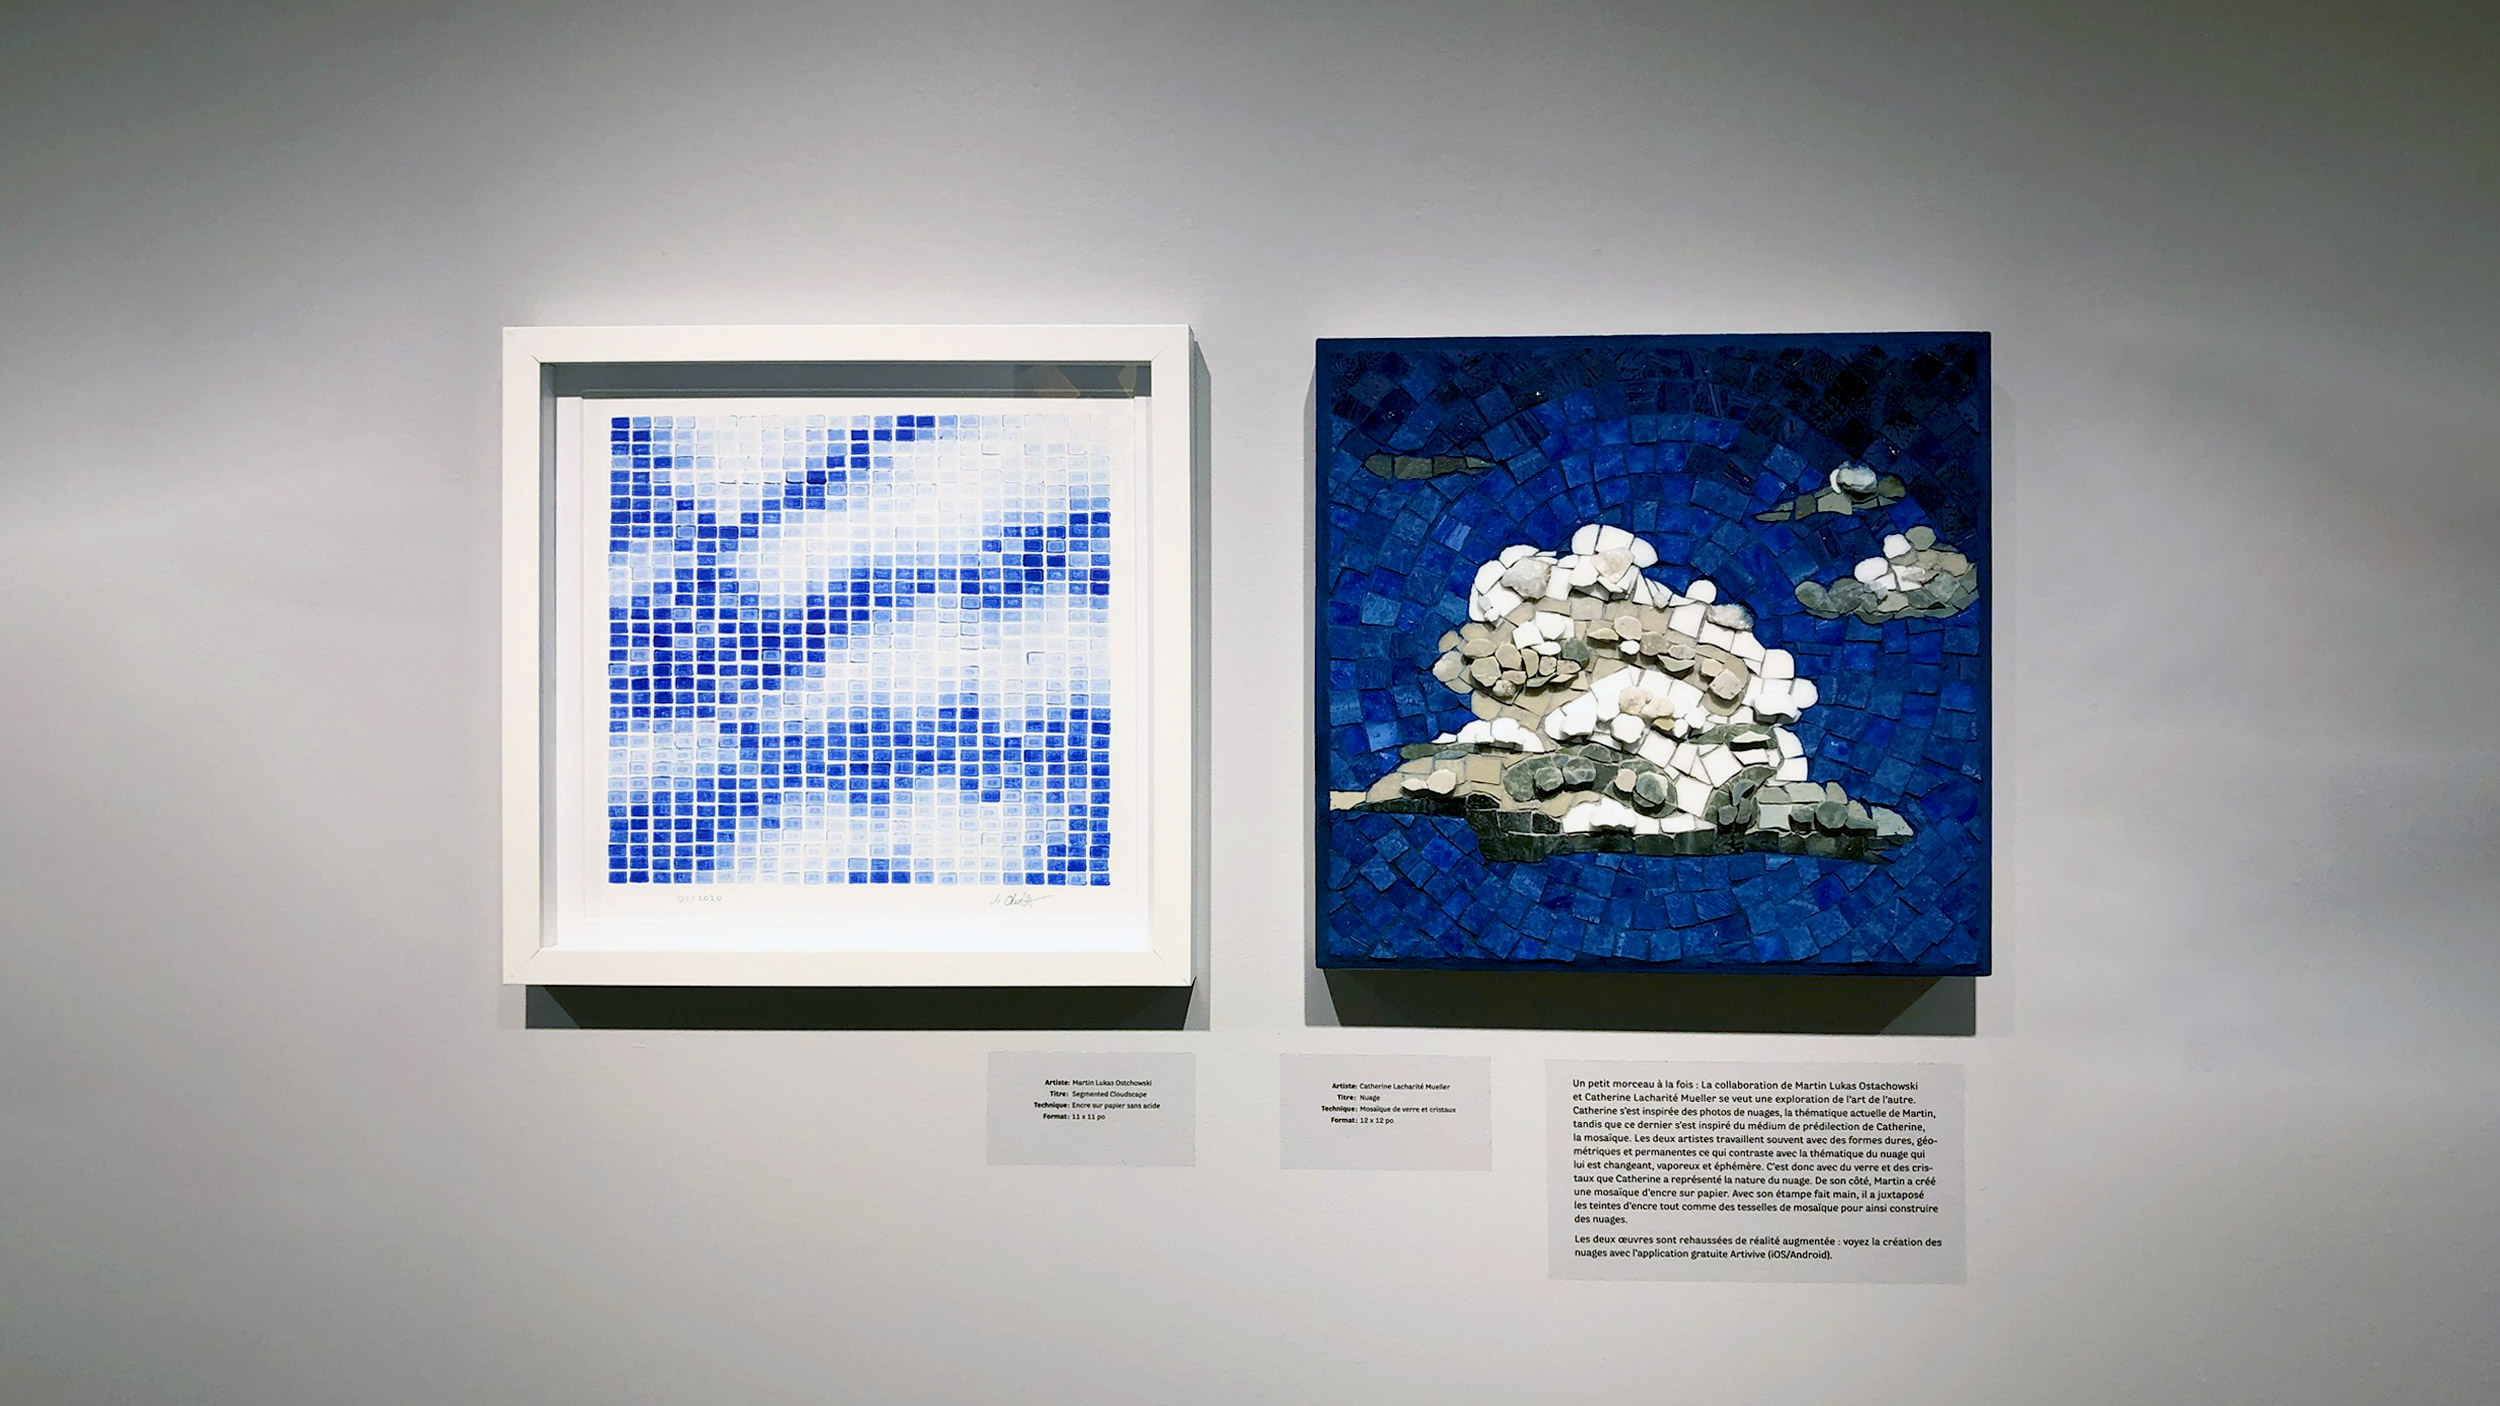 Cloud diptych during the intersection group exhibition in Sherbrooke, QC  Left: Segmented Cloudscape, ink on acid-free paper, Martin Lukas Ostachowski, 2020  Right: Nuage, Glas and crystal mosaic, Catherine Lacharite Mueller, 2020  Photo credit: Vincent Arnold